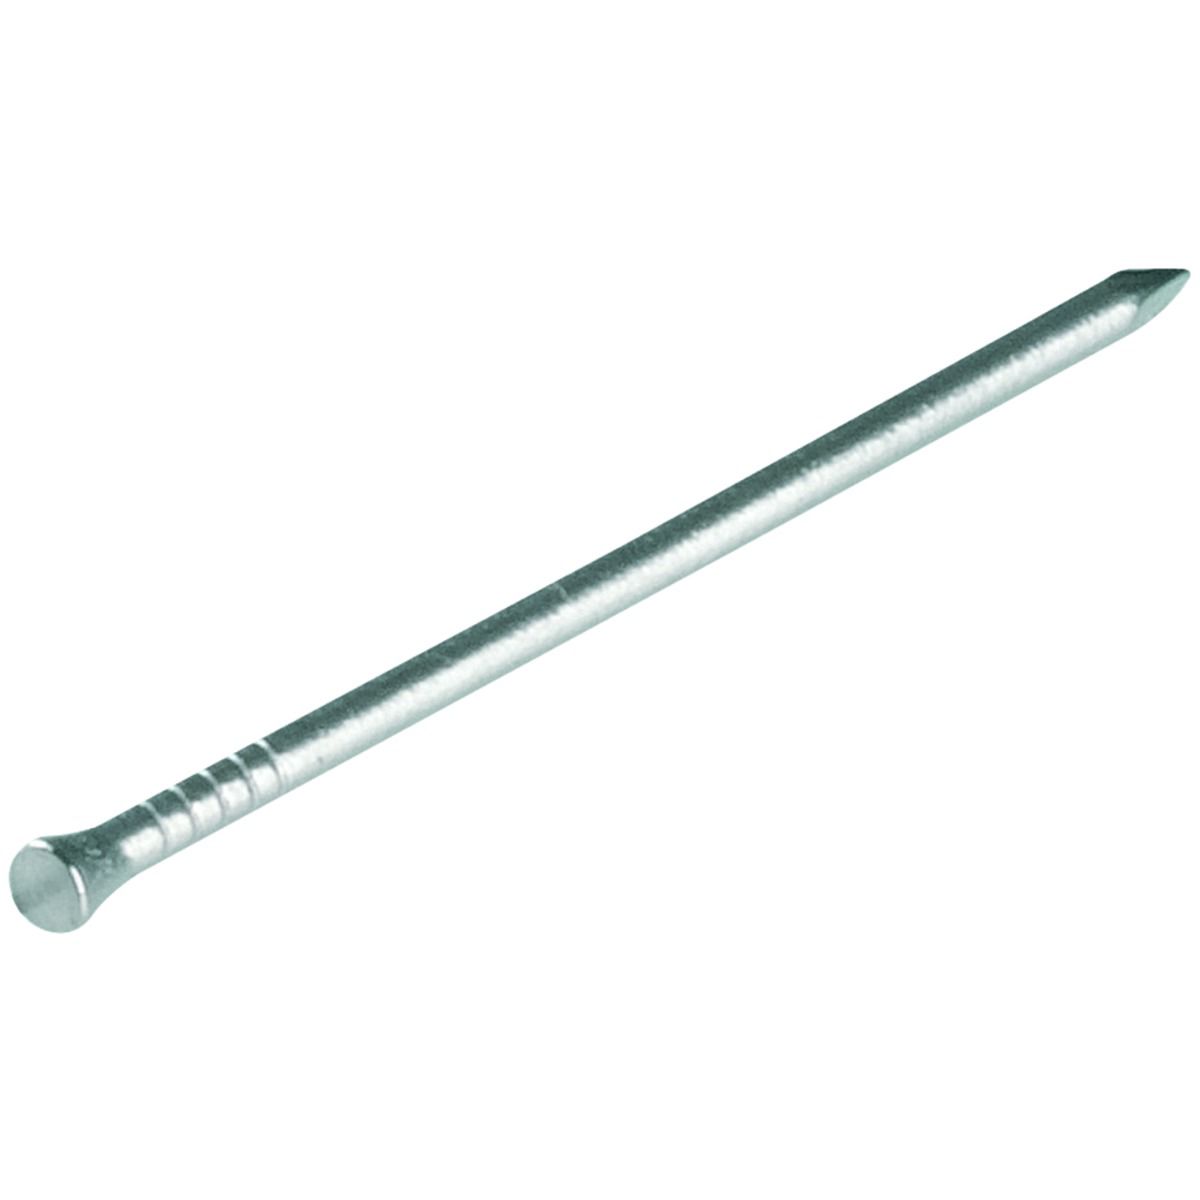 Image of Wickes 40mm Stainless Steel Panel Pins - 100g